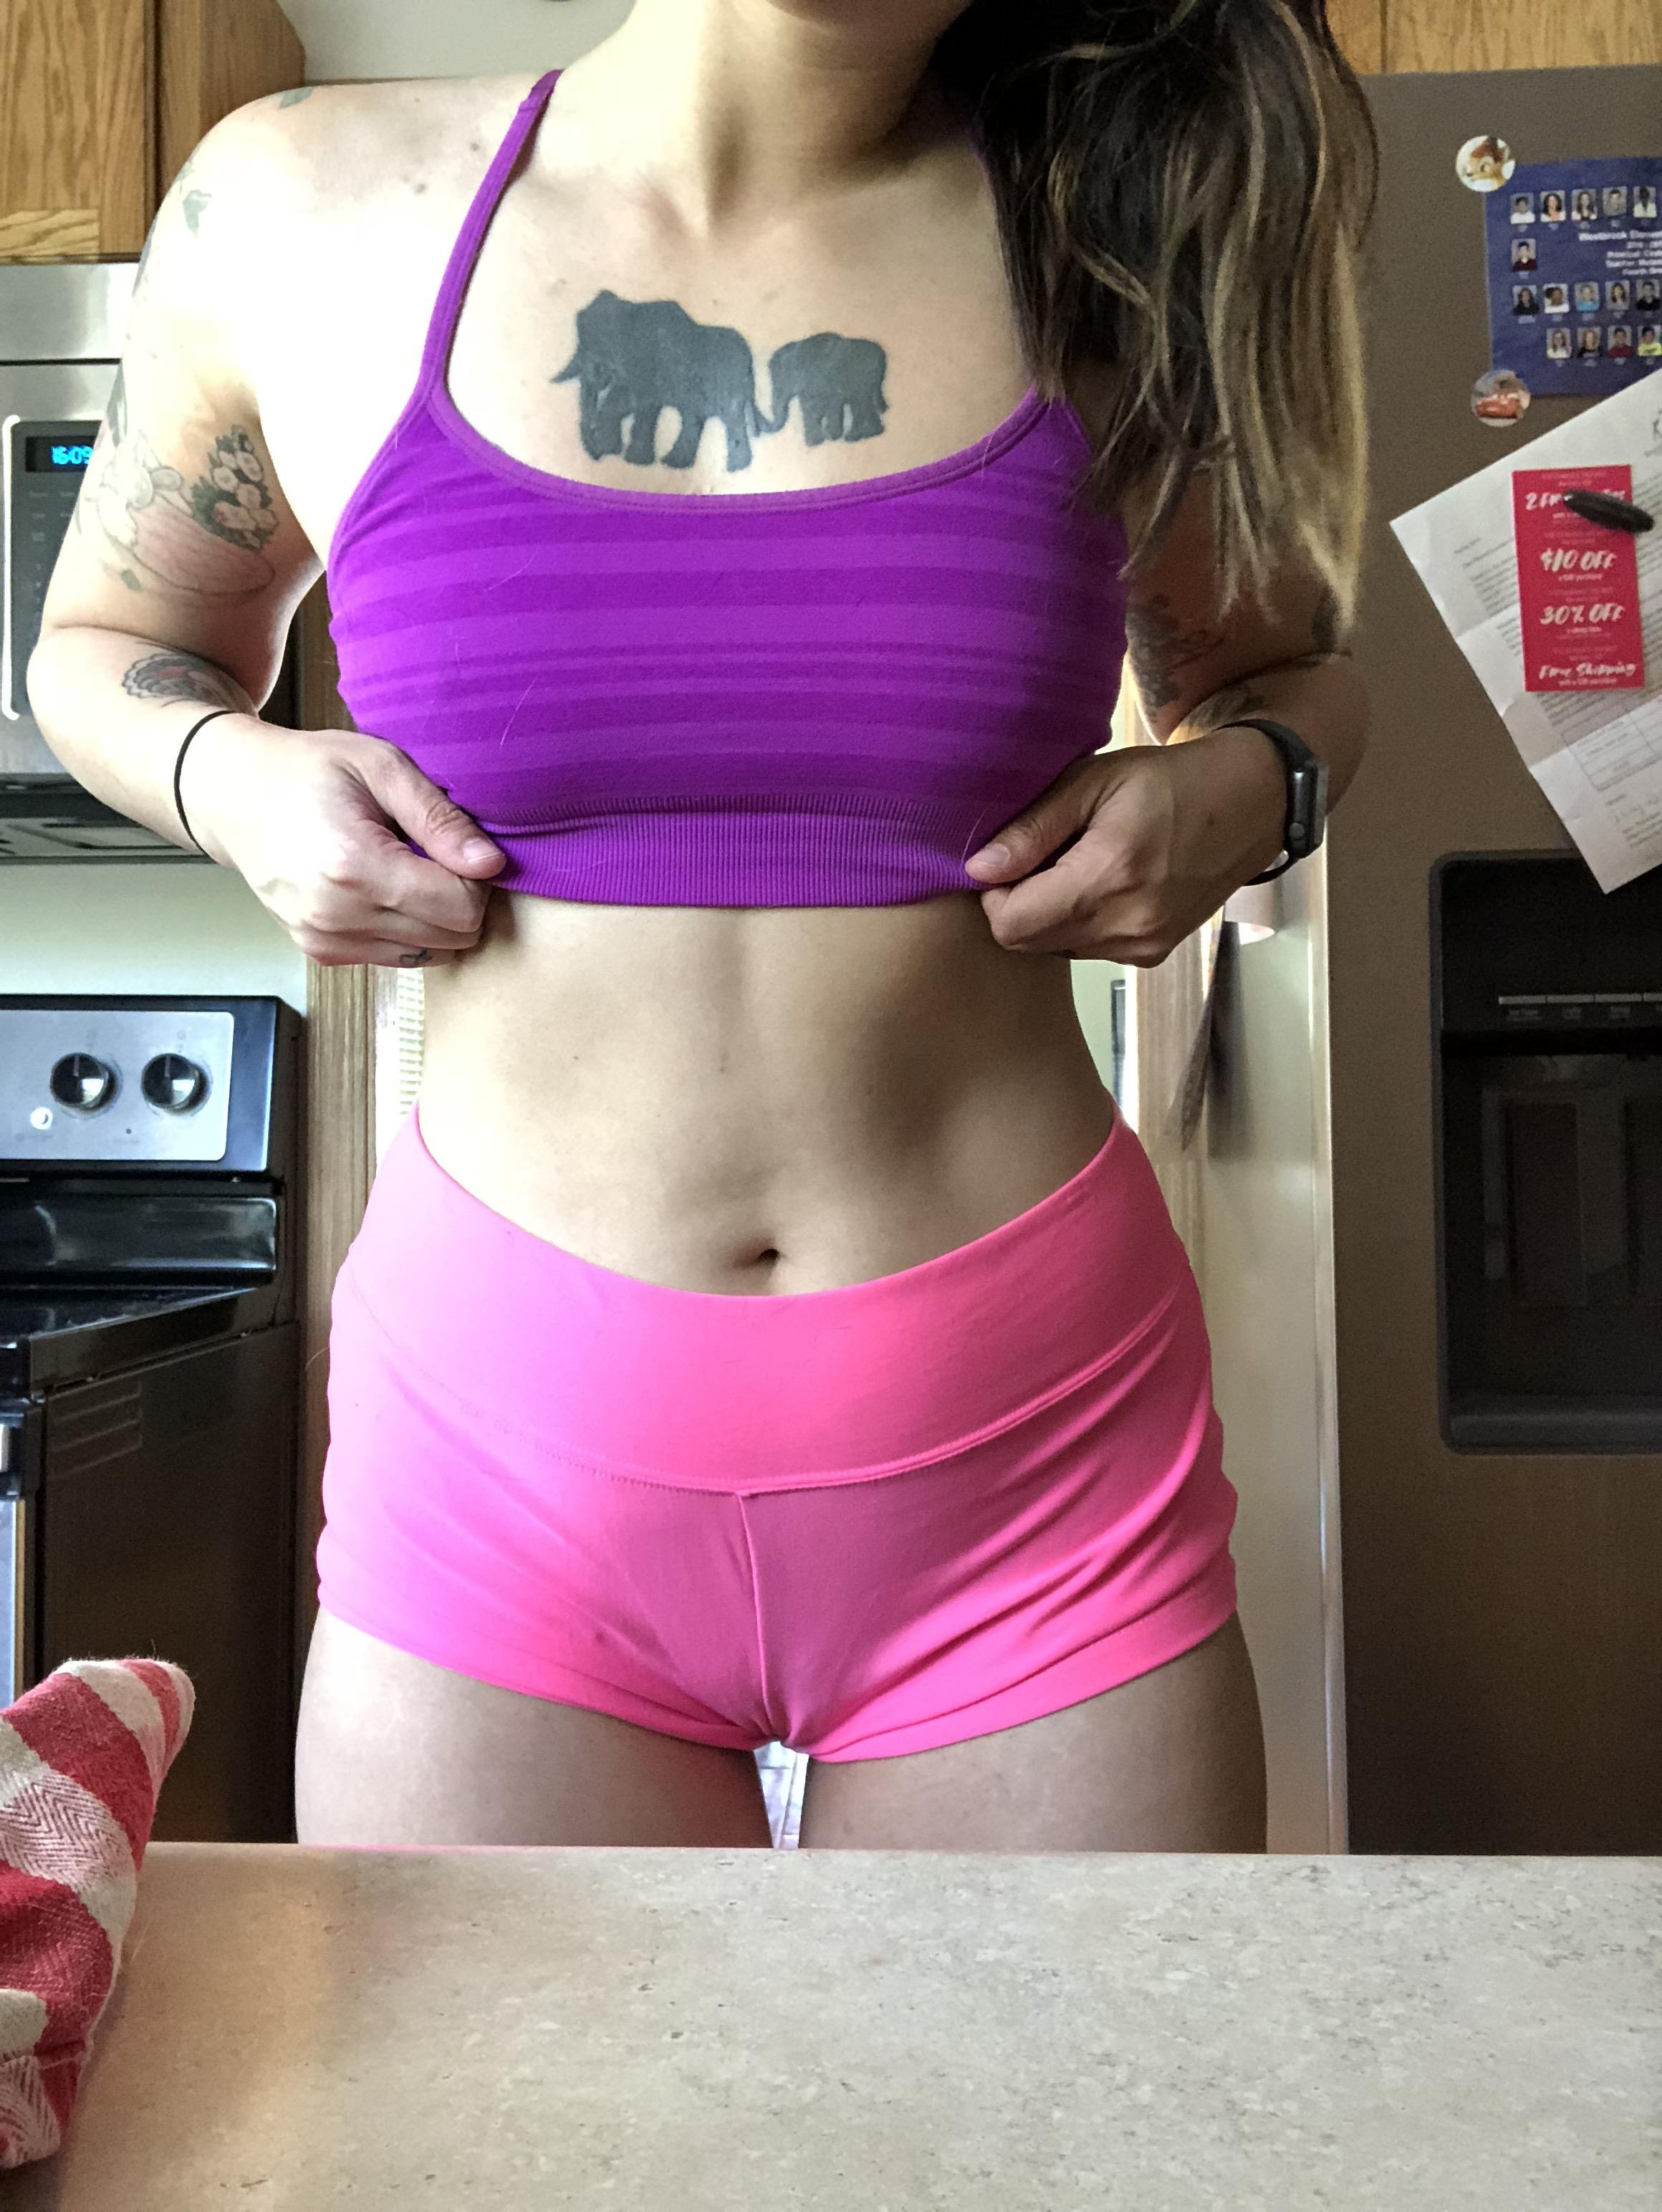 I’ve been cutting (f)or my vacation to Florida in two weeks. Do you think I’ll look okay in a bikini 